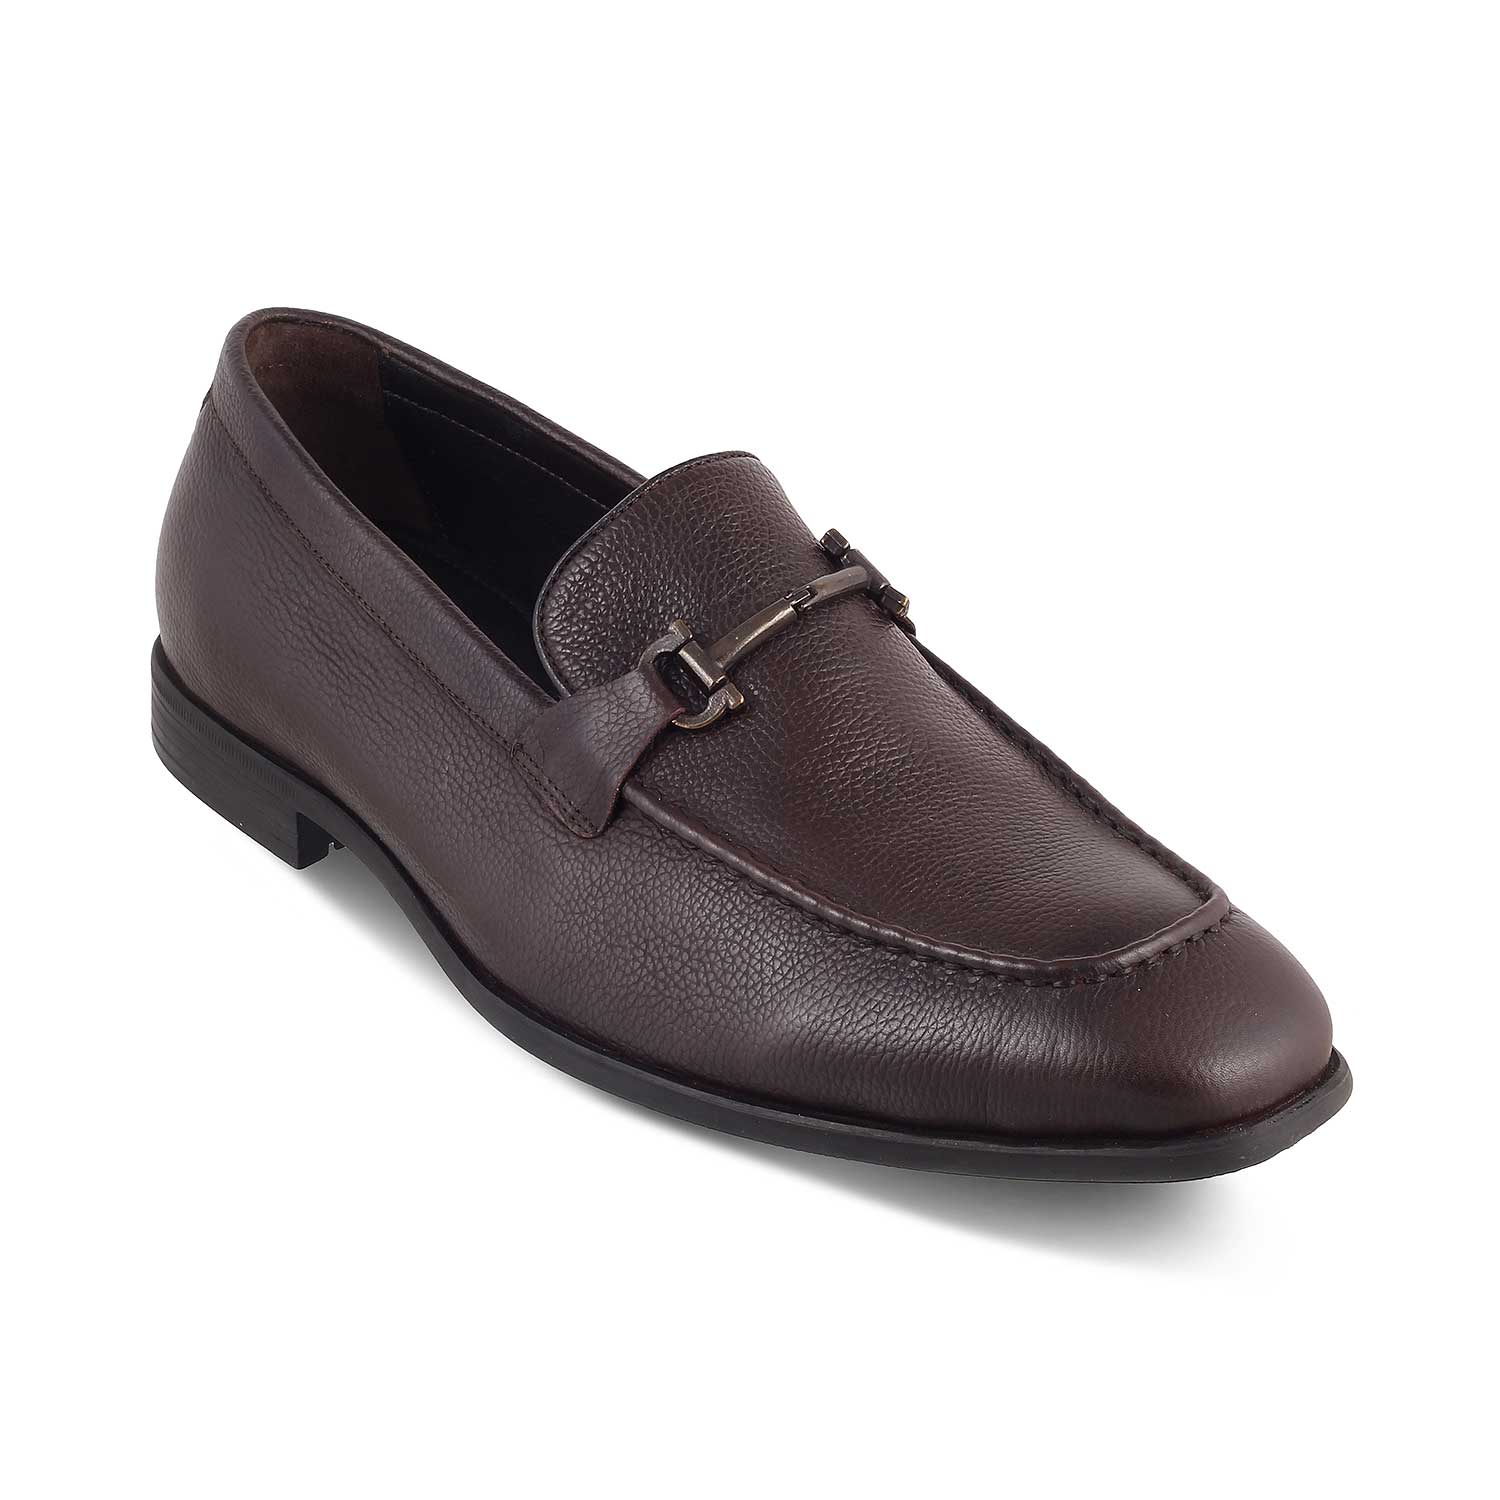 The Tumac Brown Men's Leather Loafers Tresmode